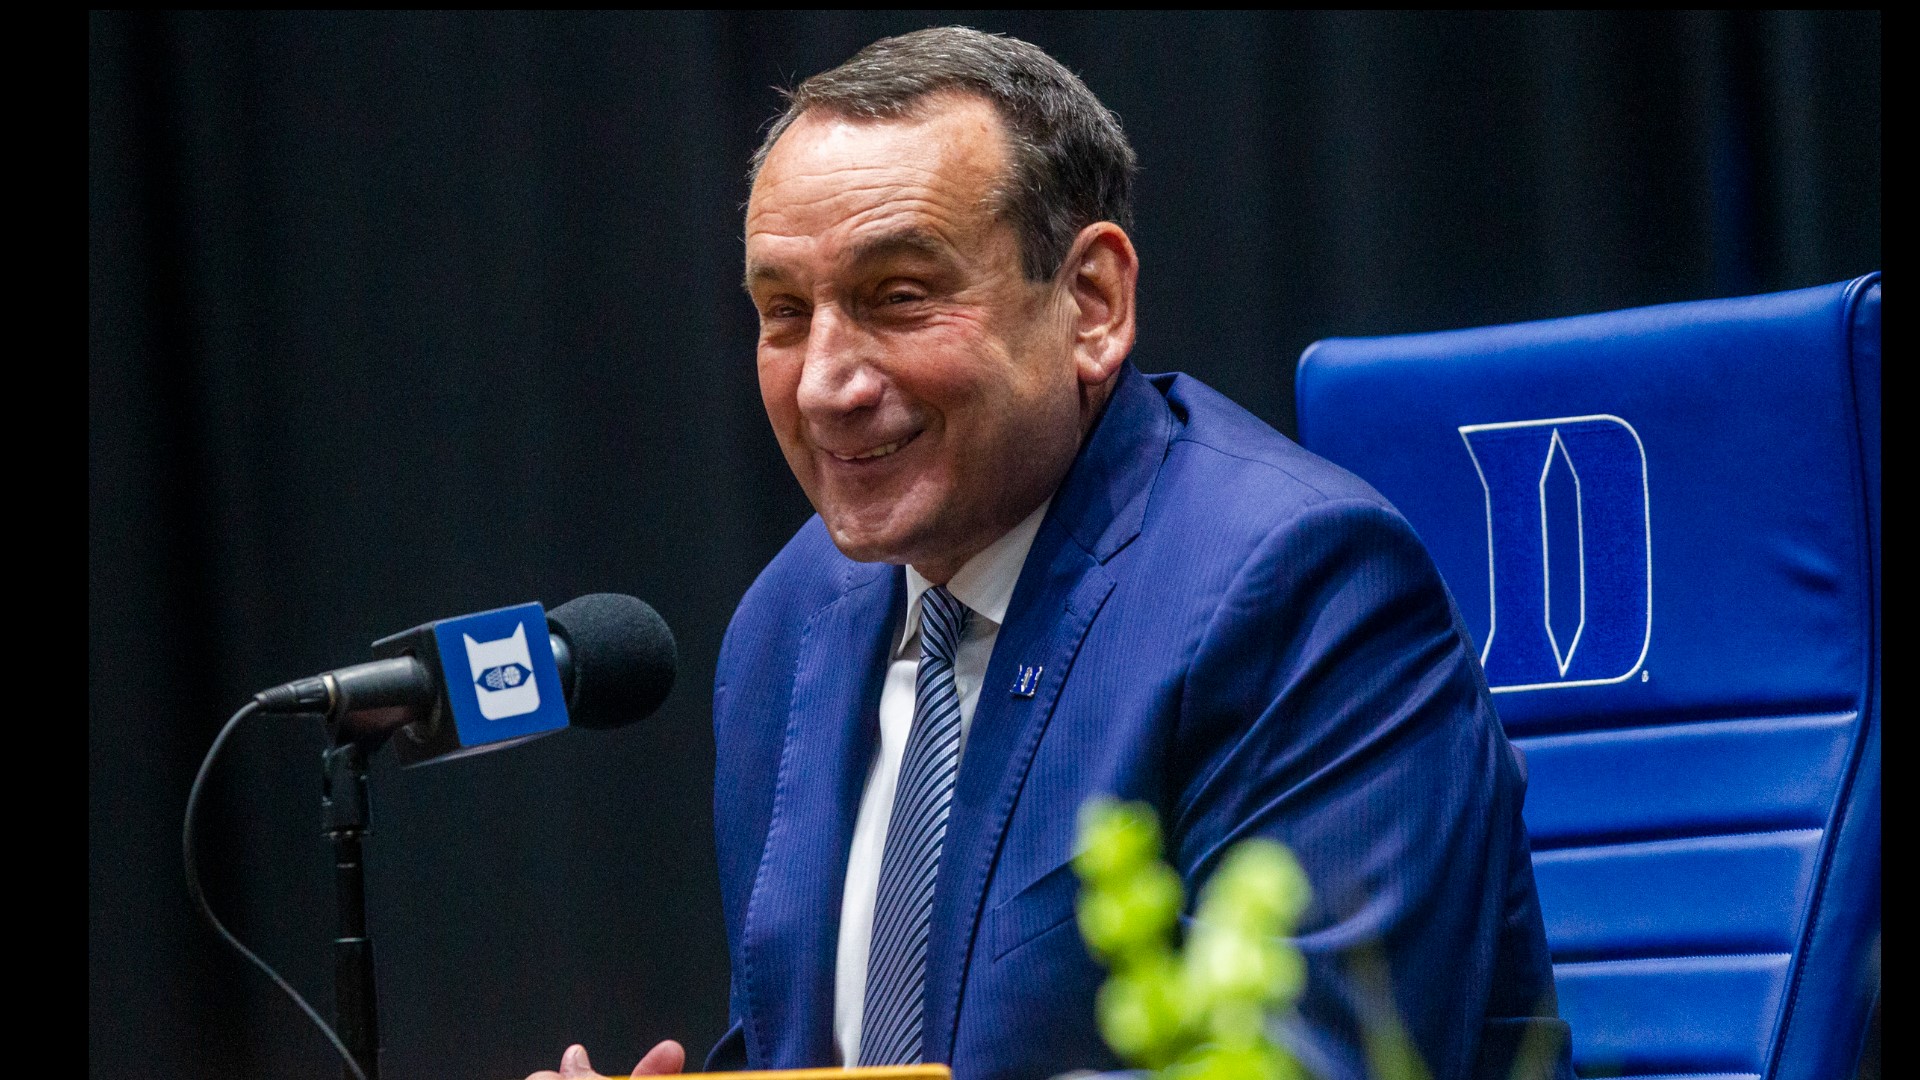 Coach K held a news conference Thursday to announce his planned retirement, reflect on his career, discuss his goals for his last season, and answer questions.